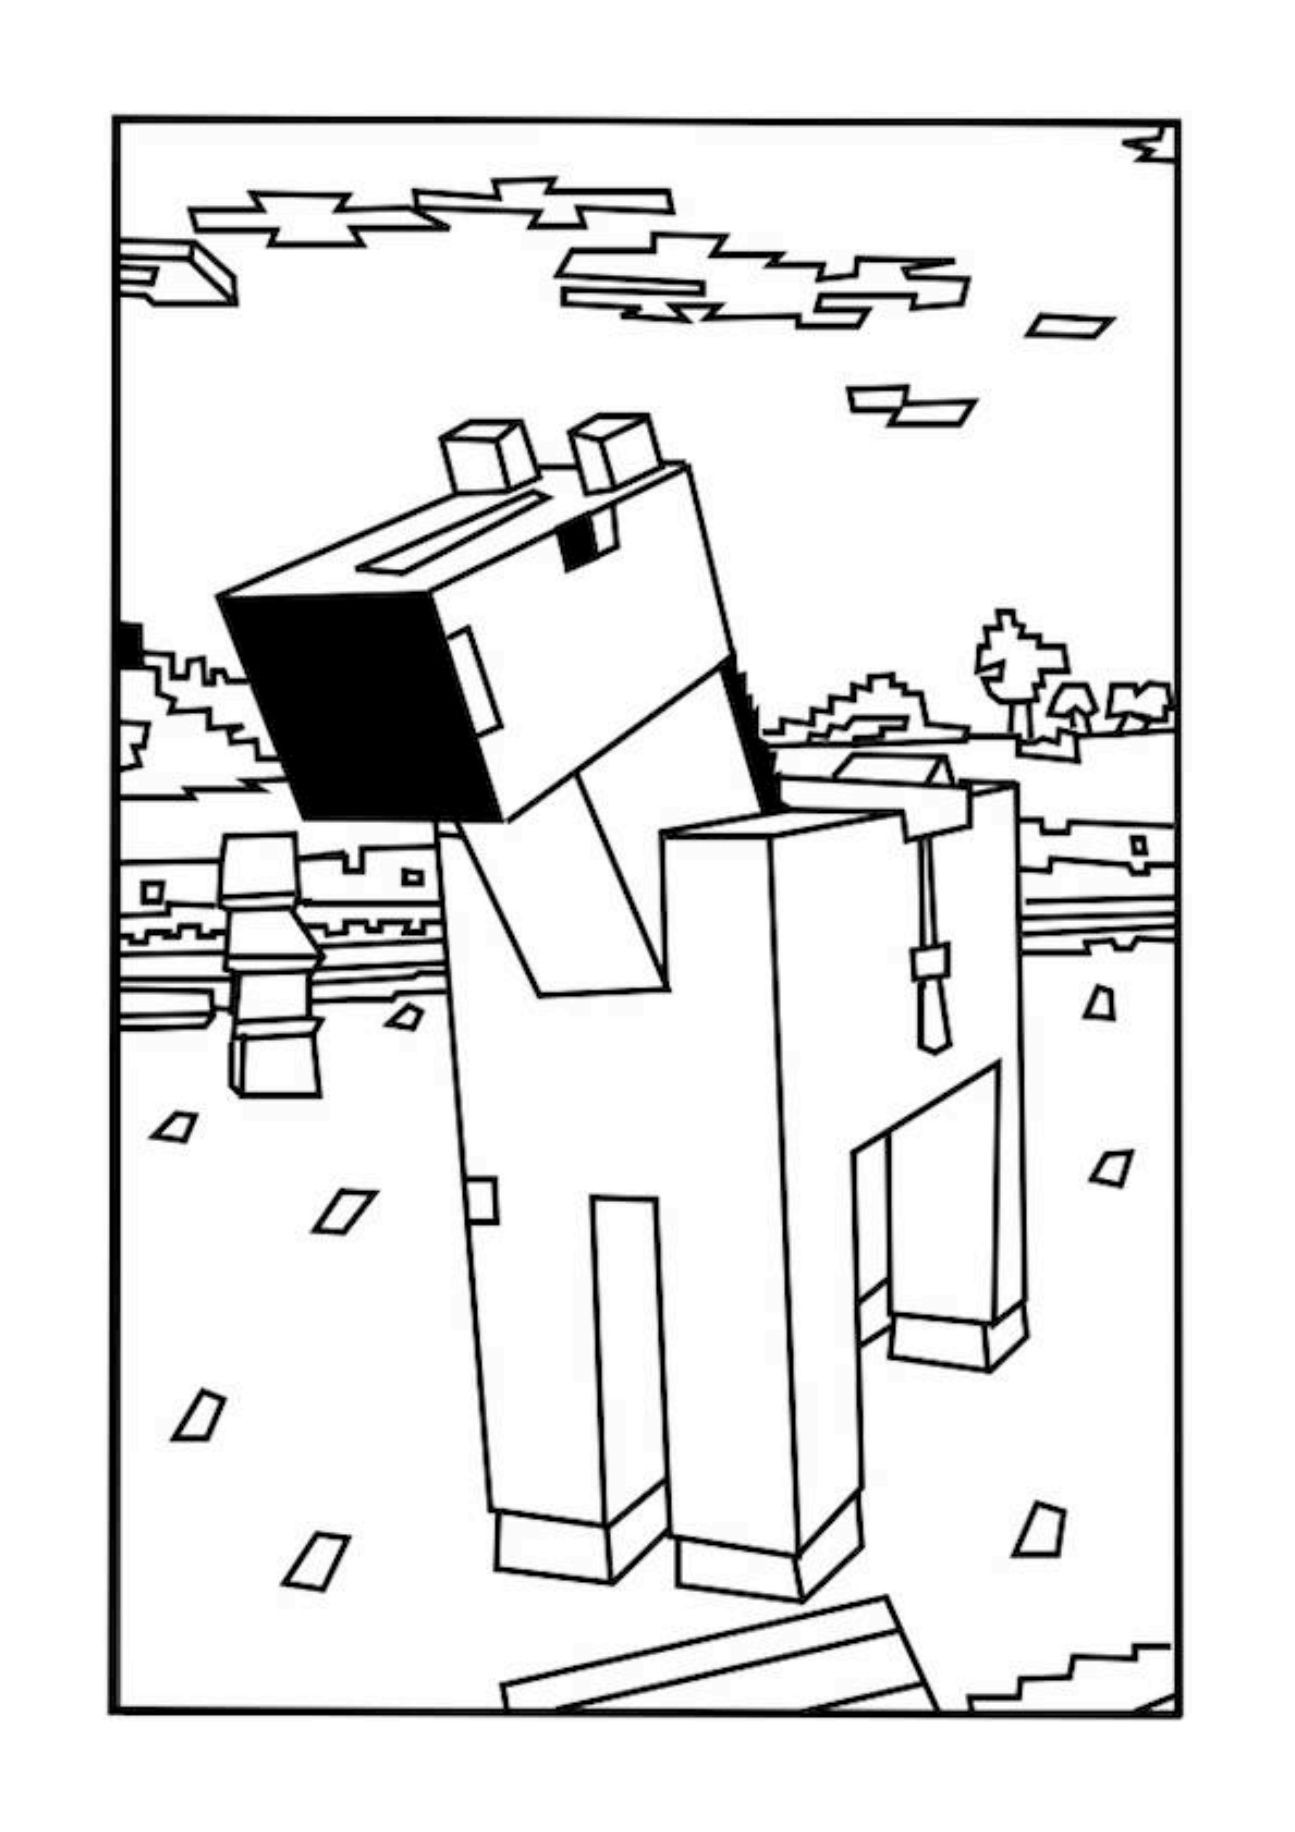 Coloring Sheets For Boys Minecrfat
 Coloring Pages For Boys Minecraft AZ Coloring Pages